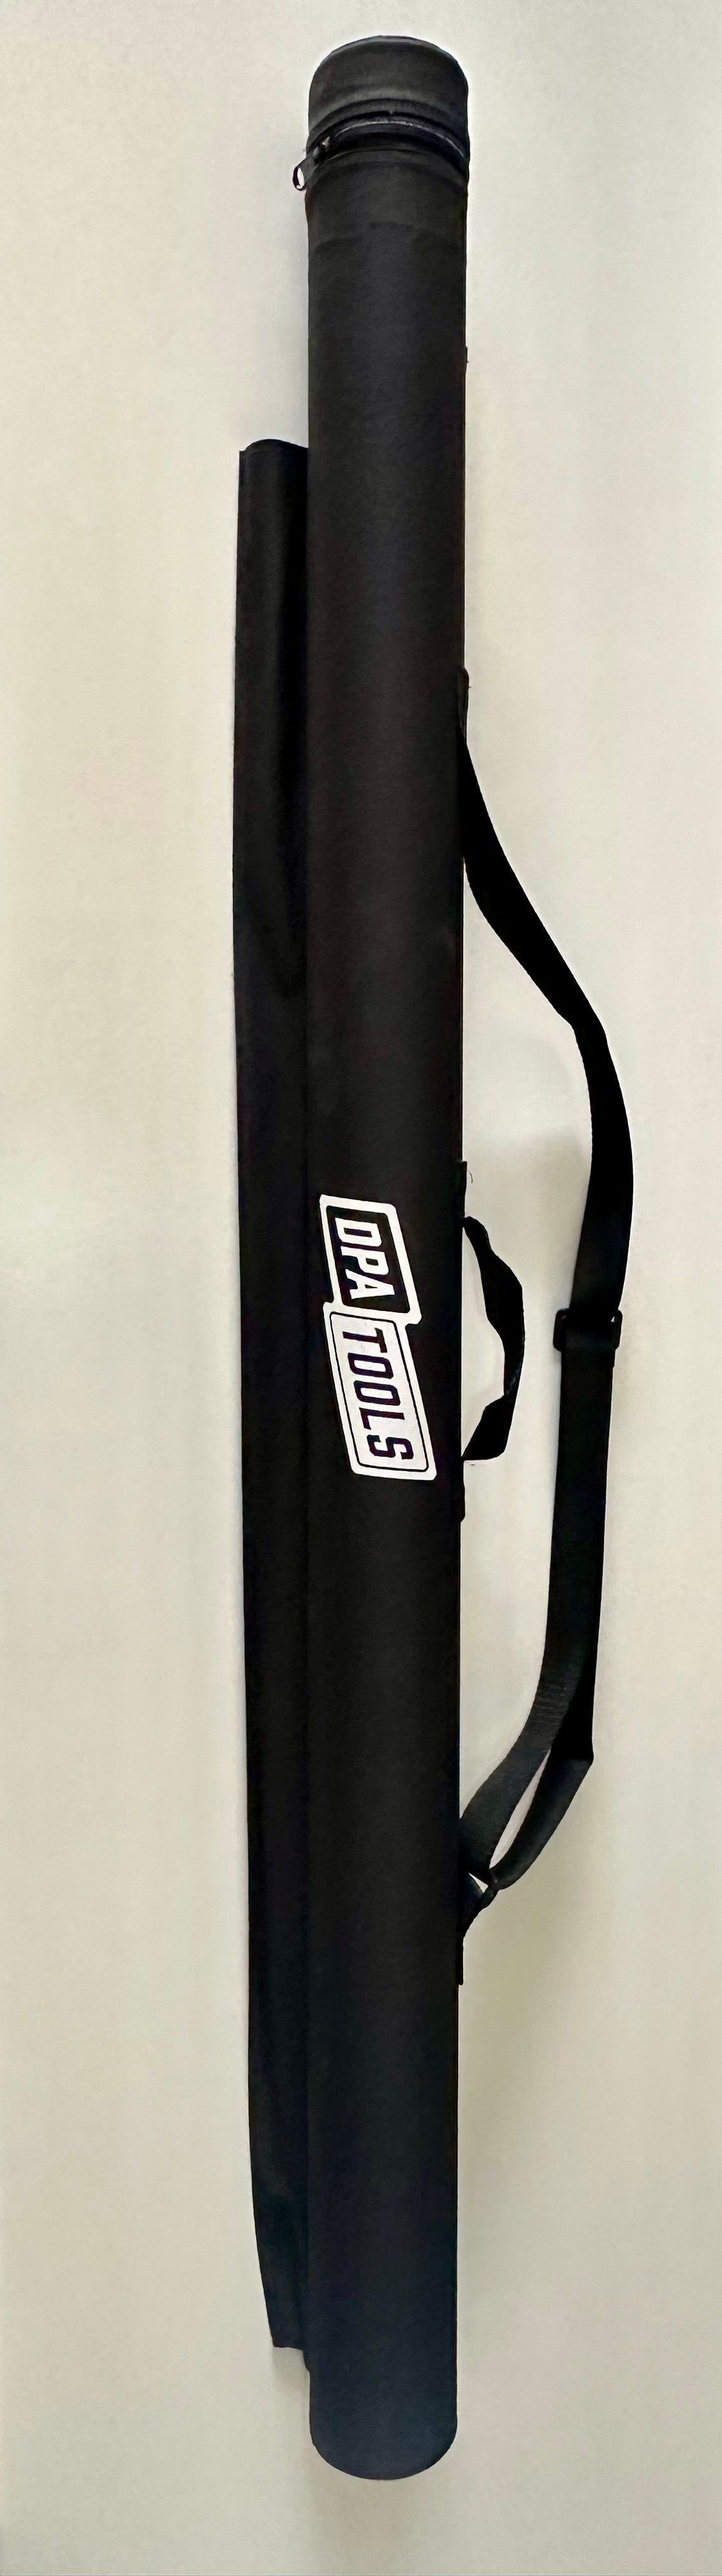 Dpatools 42" Compound tube and Case